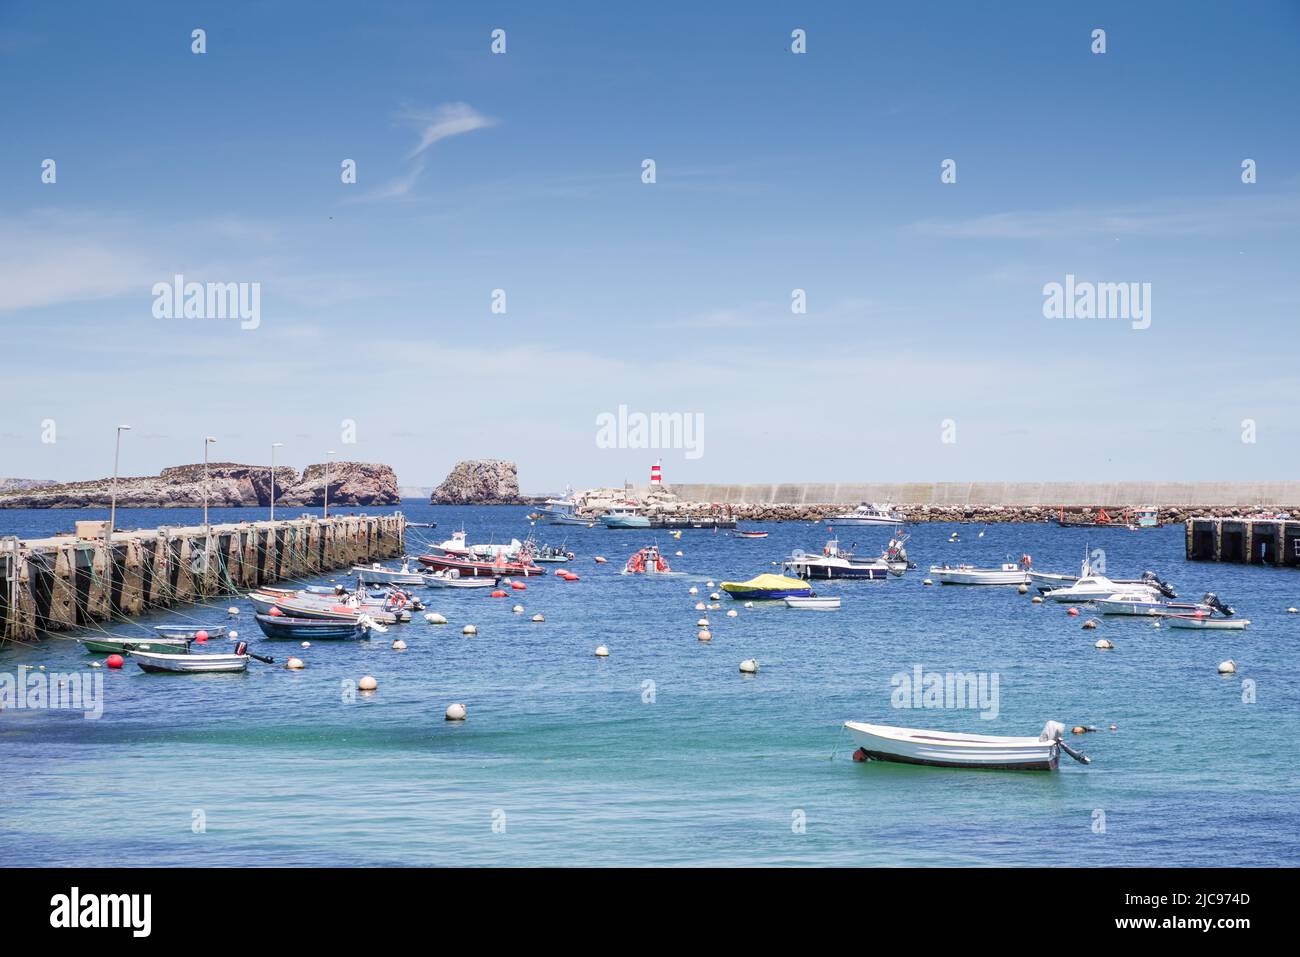 Entrance to Sagres Harbour is sheltered by Martinhal Islets (in the background) - Sagres, Algarve, Portugal Stock Photo